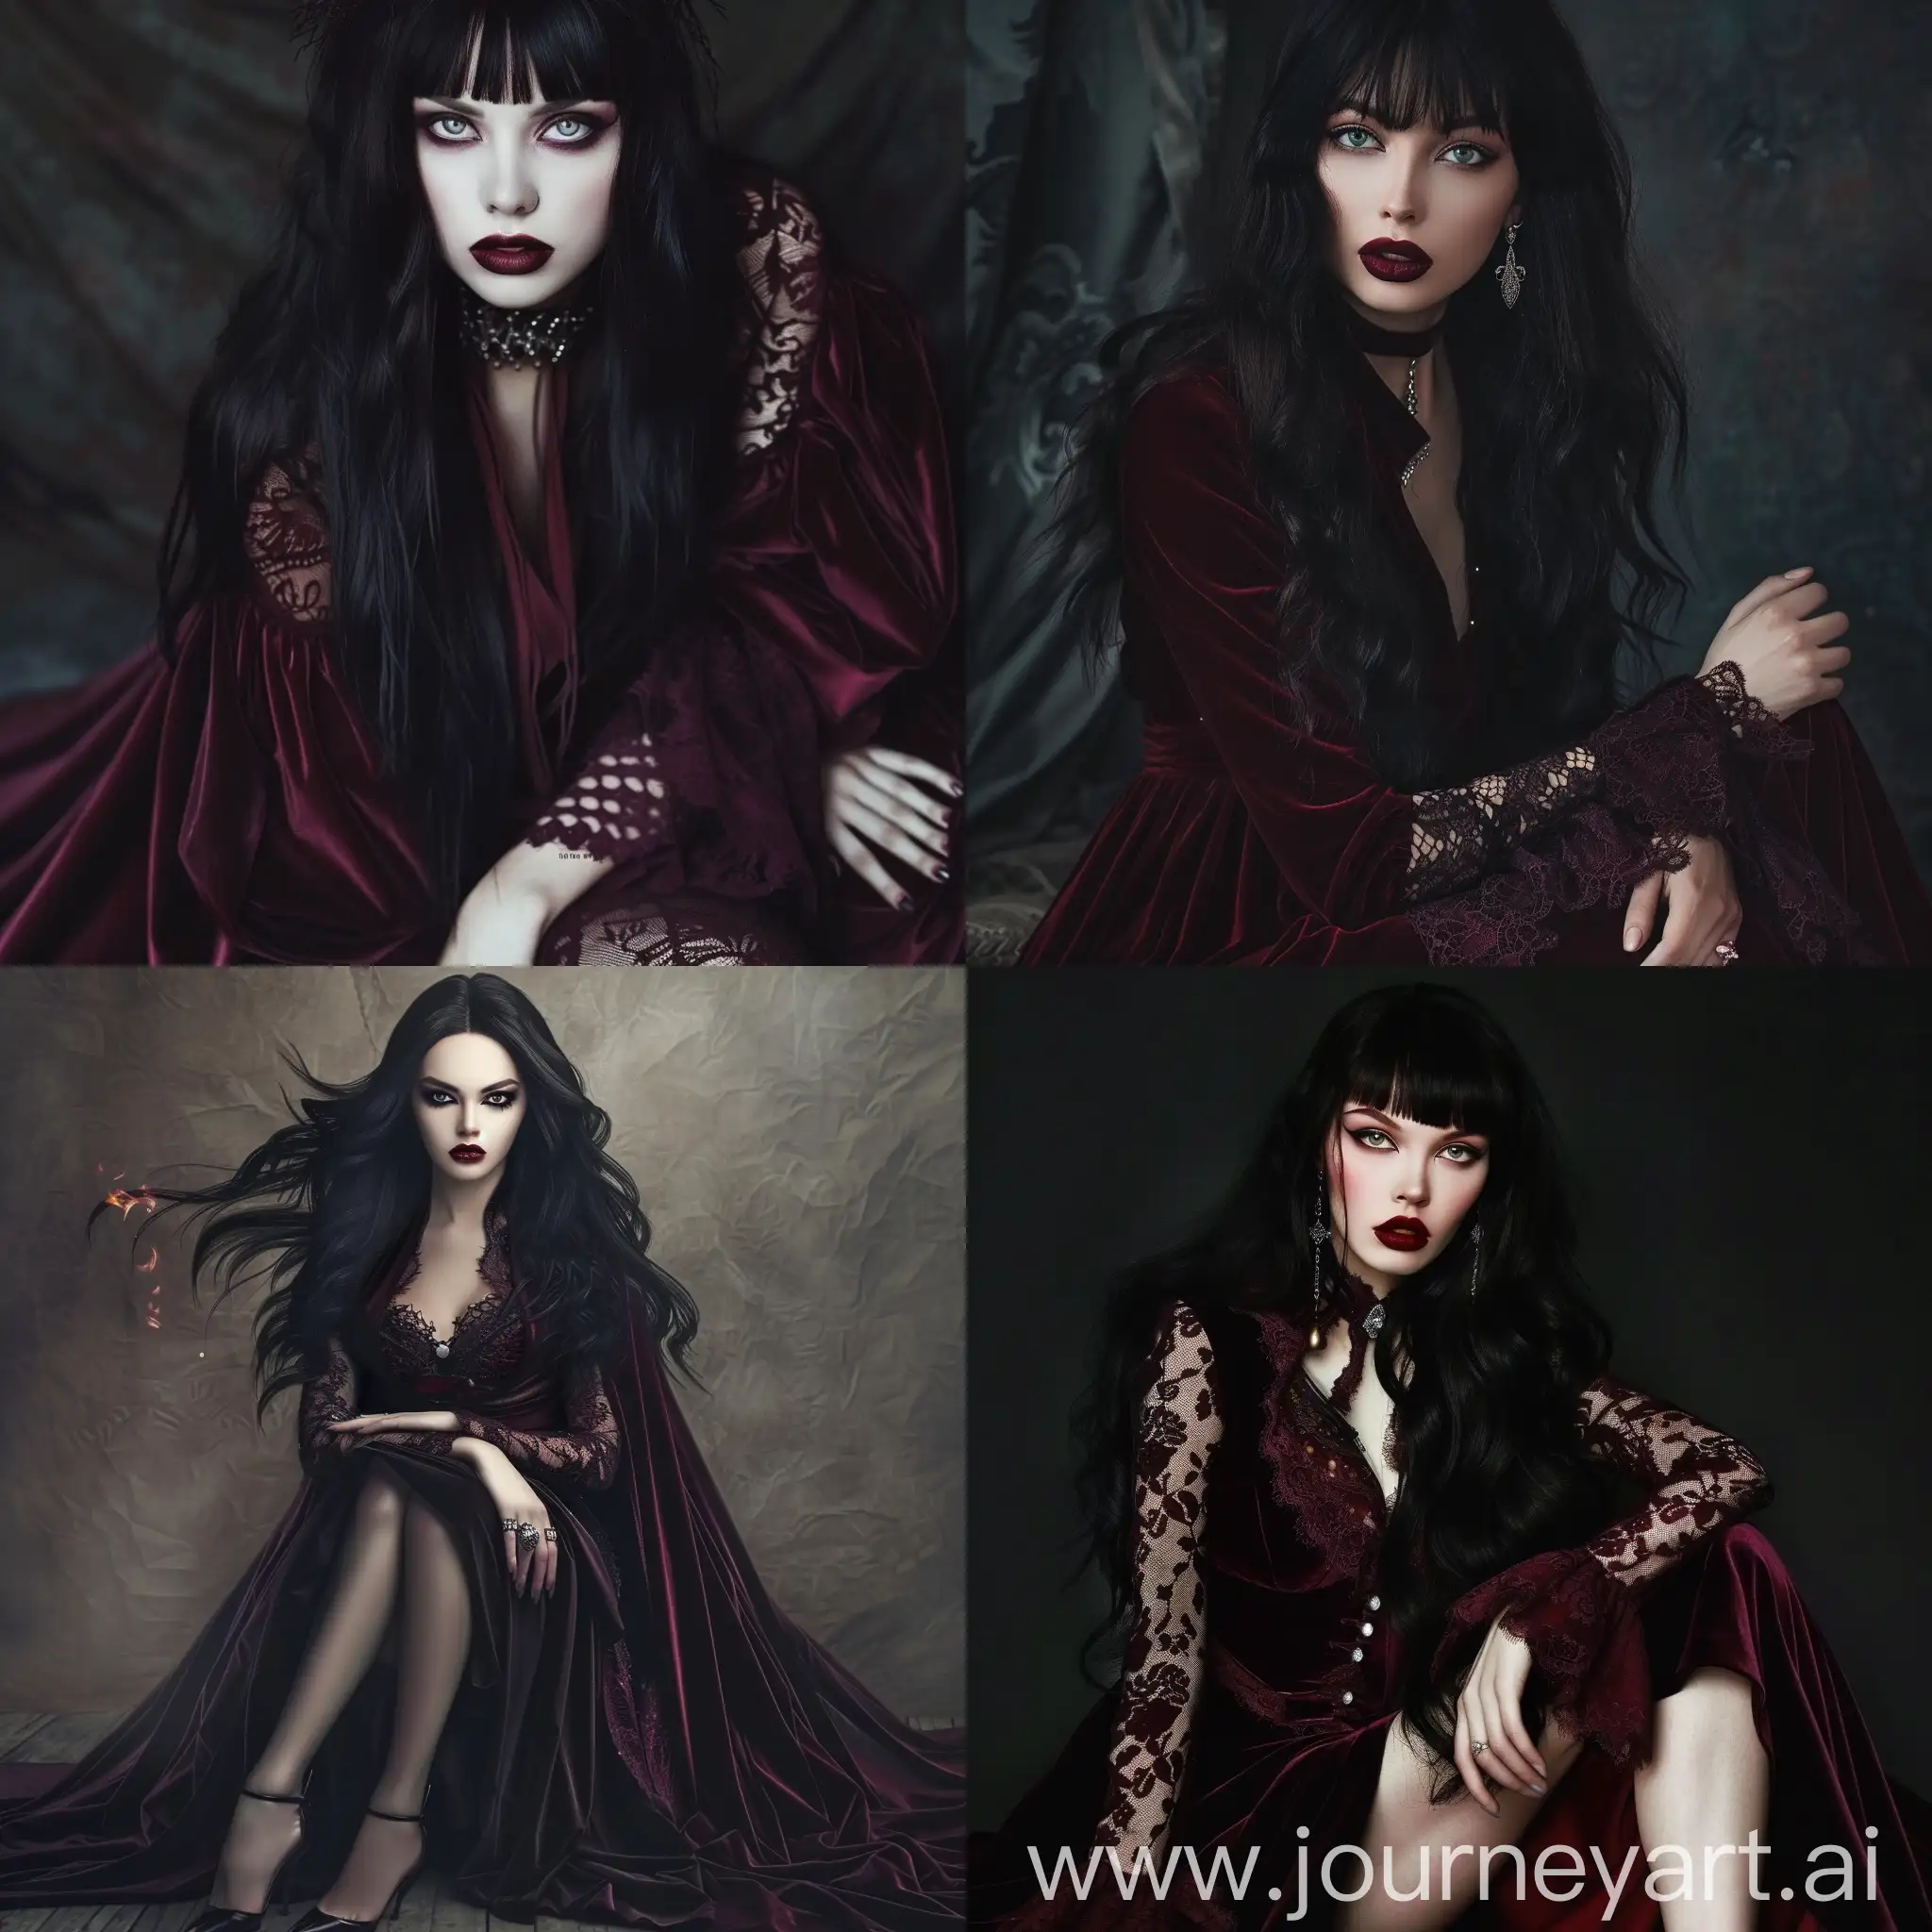 Aristocratic-Beauty-in-Maroon-Velvet-Dress-and-Silver-Jewelry